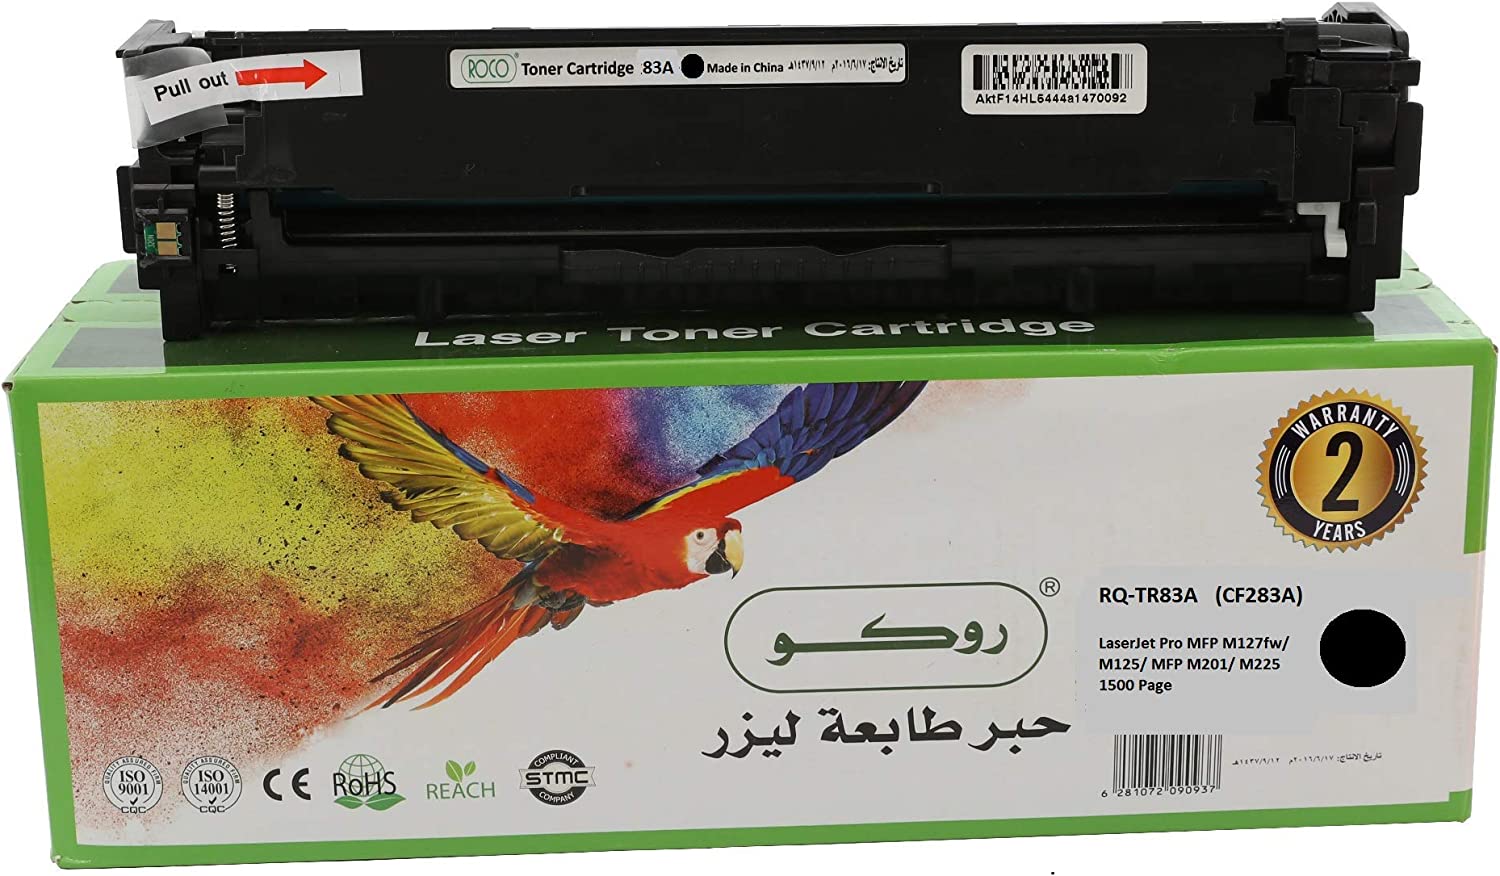 Roco Toner Cartridge 83A Black CF283A / Page Yield 1500 Pages